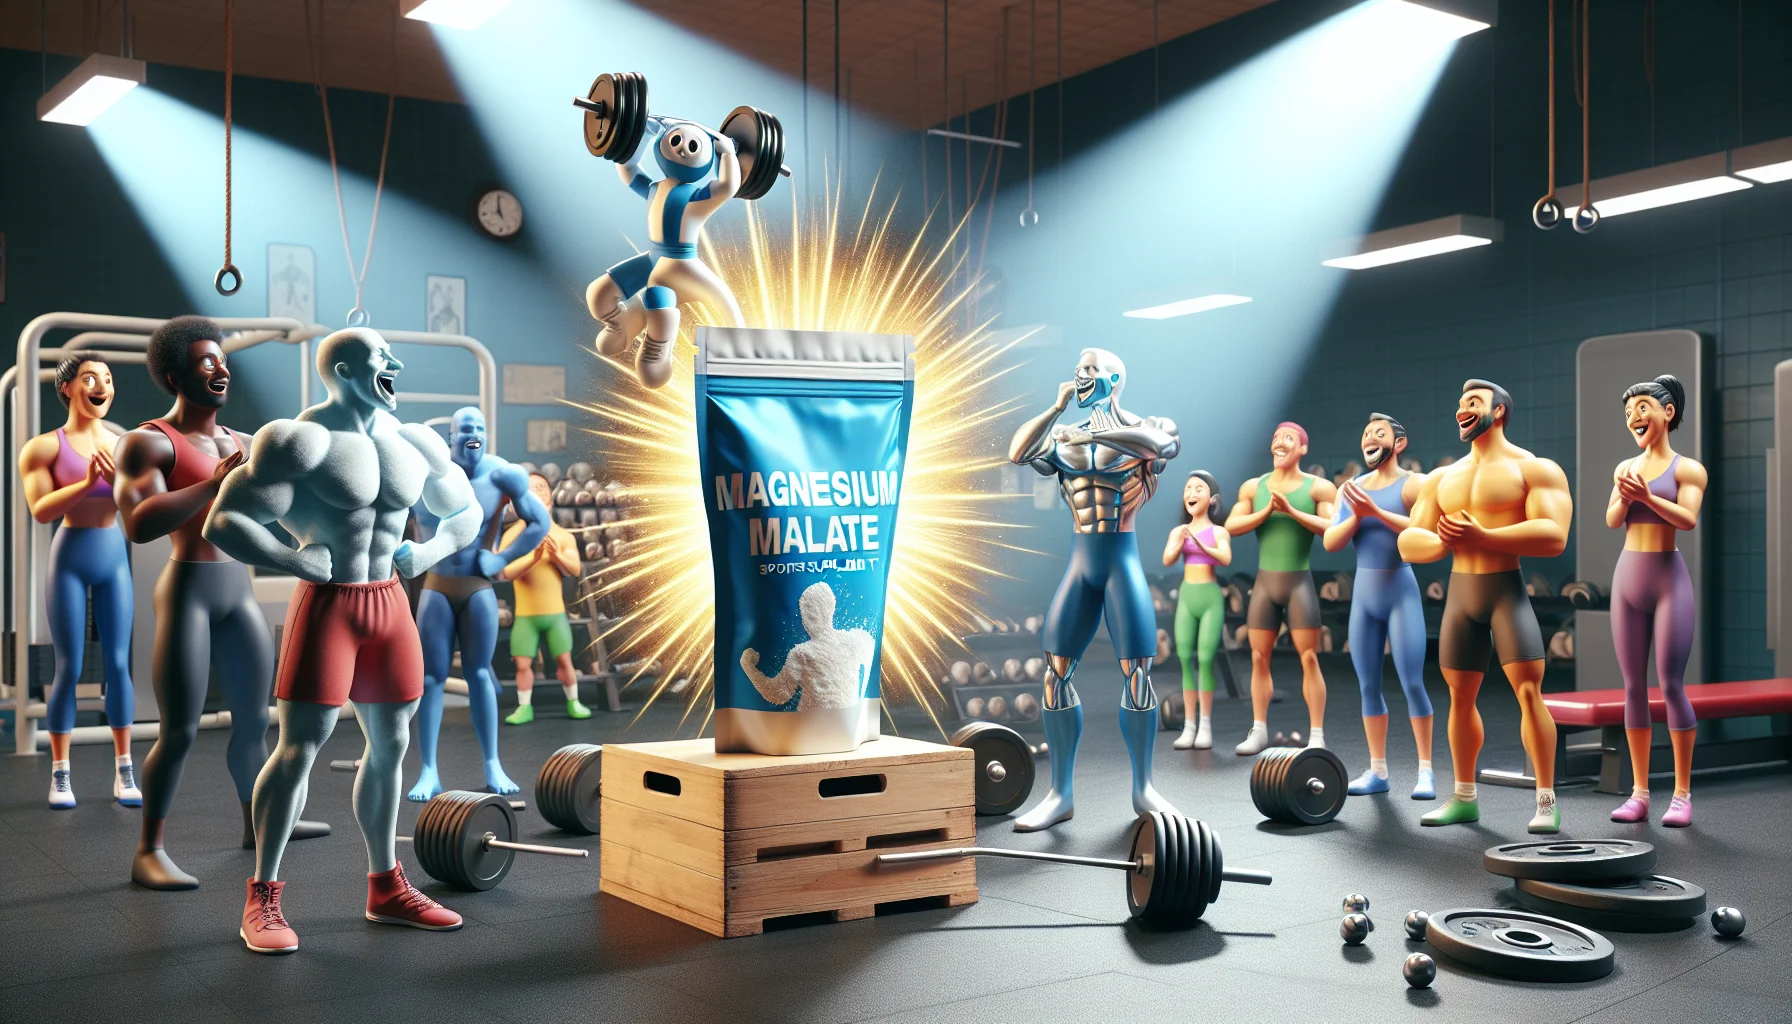 Imagine a comedic scene where magnesium malate powder, known for its sports supplement benefits, is stealing the spotlight. A pouch of it is placed in the center of a typical gym scene. The weights, treadmills, and other equipment look on in surprise and amusement, as if each item has its own personality. They appear to be applauding and cheering on the magnesium malate powder like a star athlete. A burst of energy is emanating from the pouch, symbolizing the strength and vitality it brings to those who consume it. Human figures of various descent and gender are also present in the scene, observing with interest and amusement.